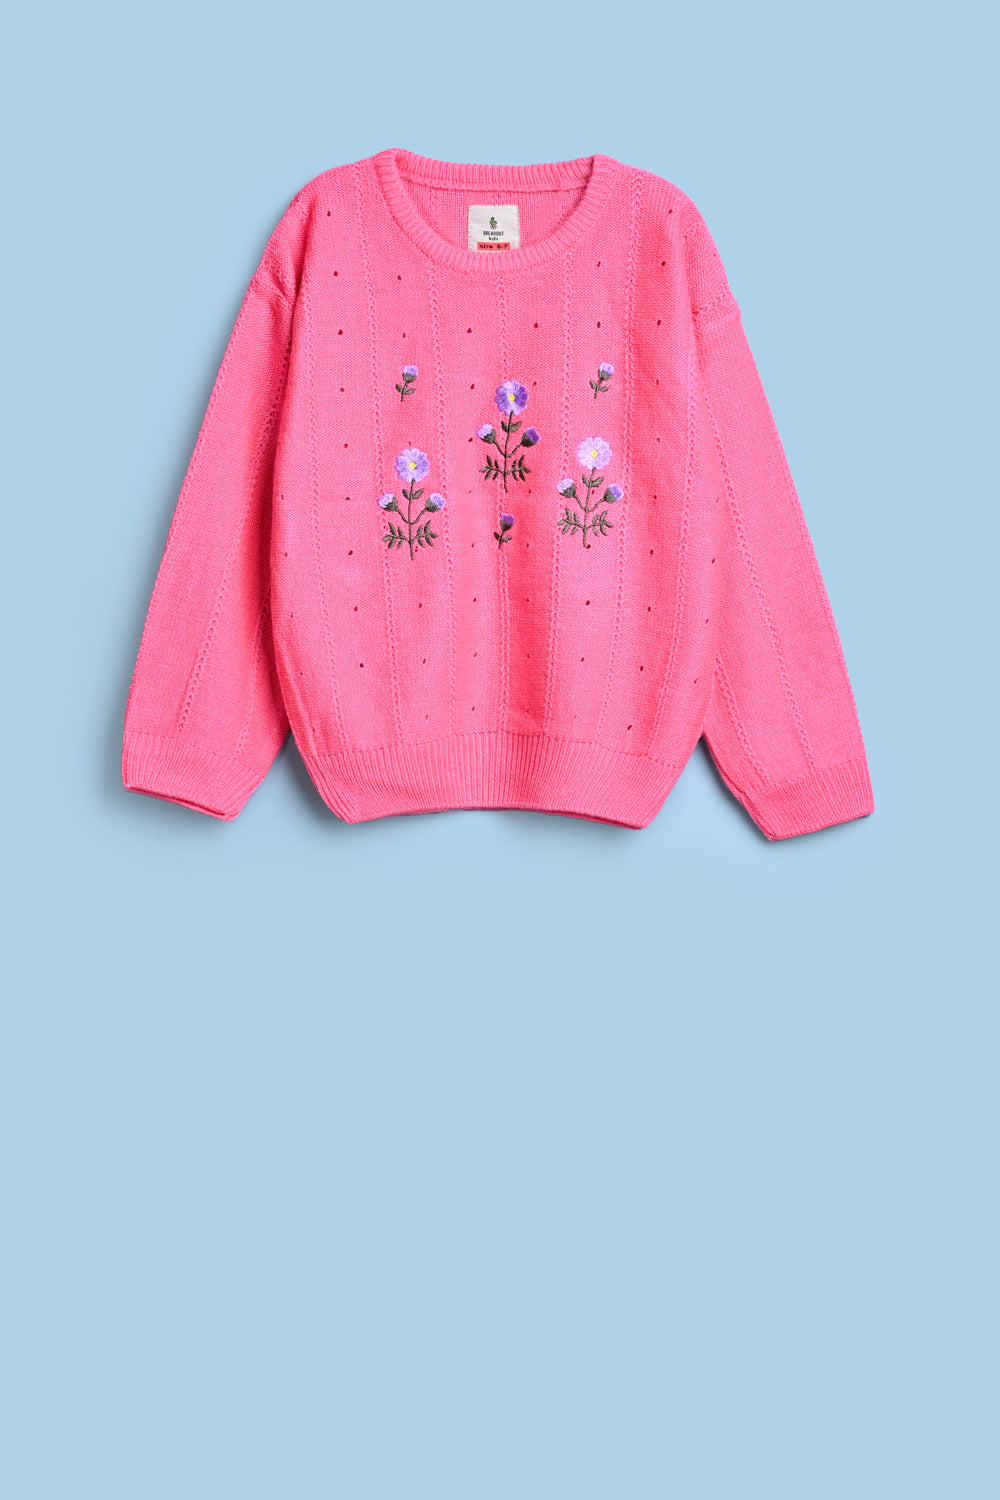 GIRLS EMBROIDERED SWEATER